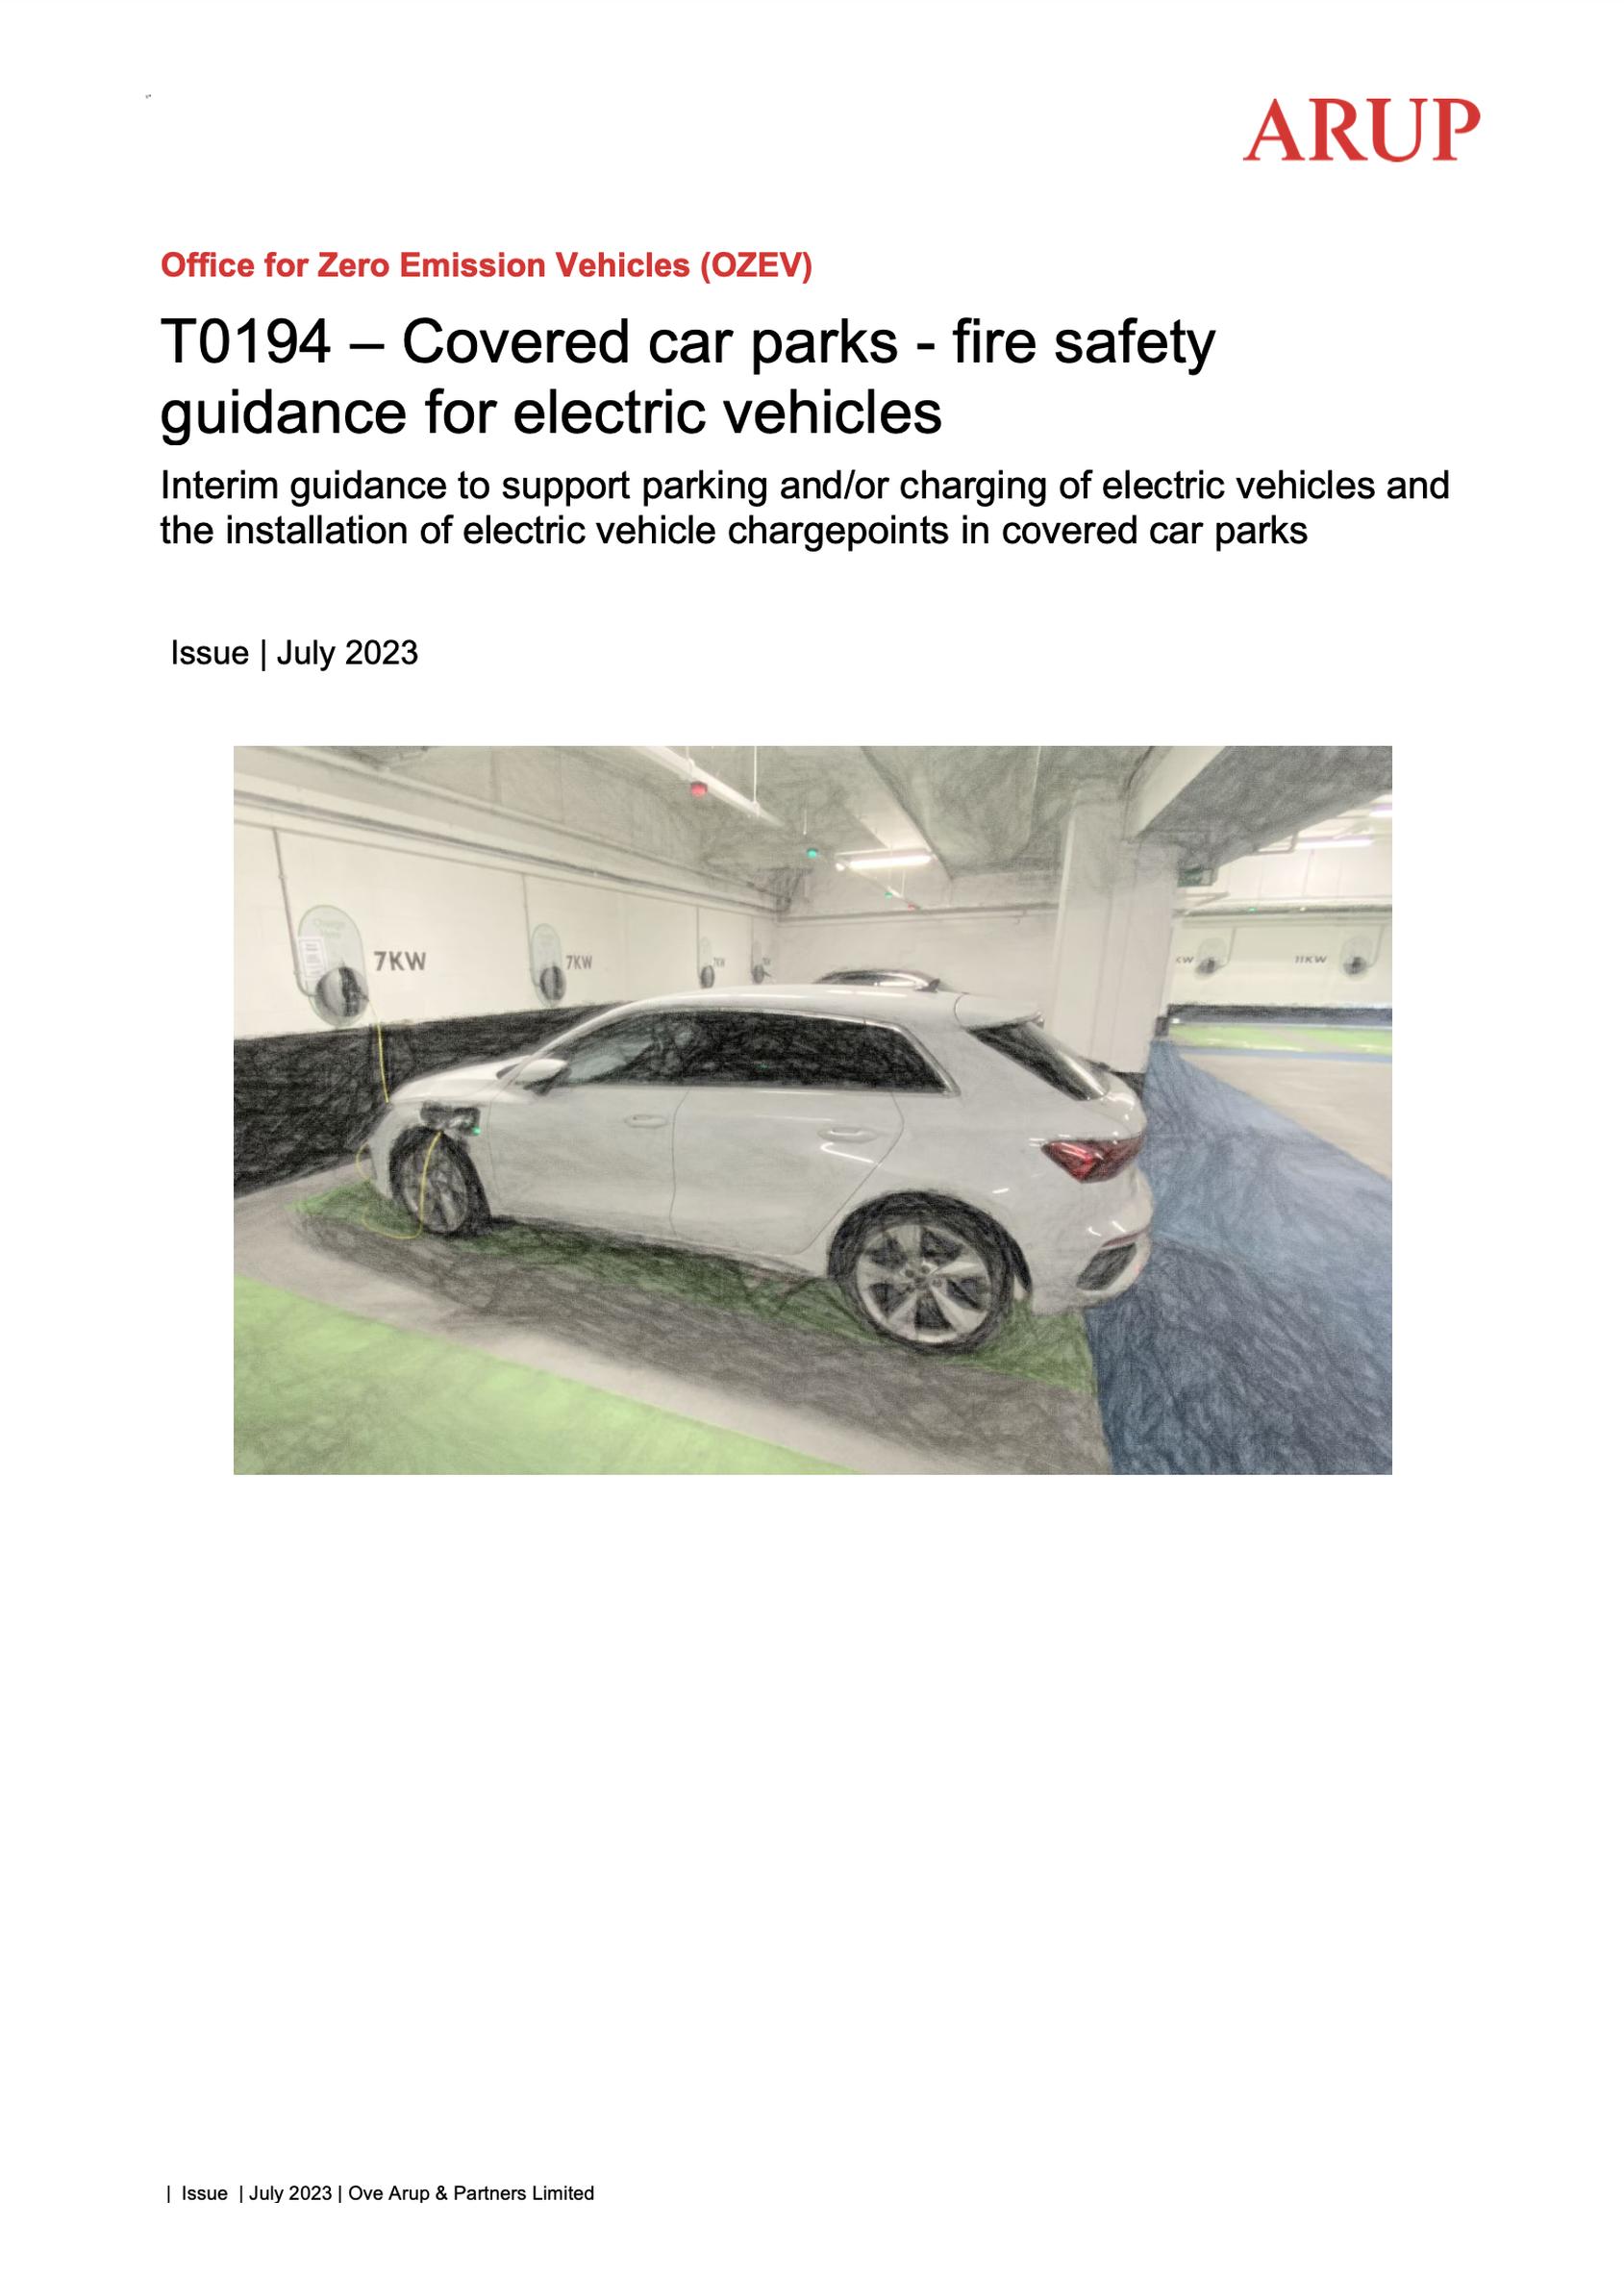 Covered Car Parks: Fire safety guidance for electric vehicles